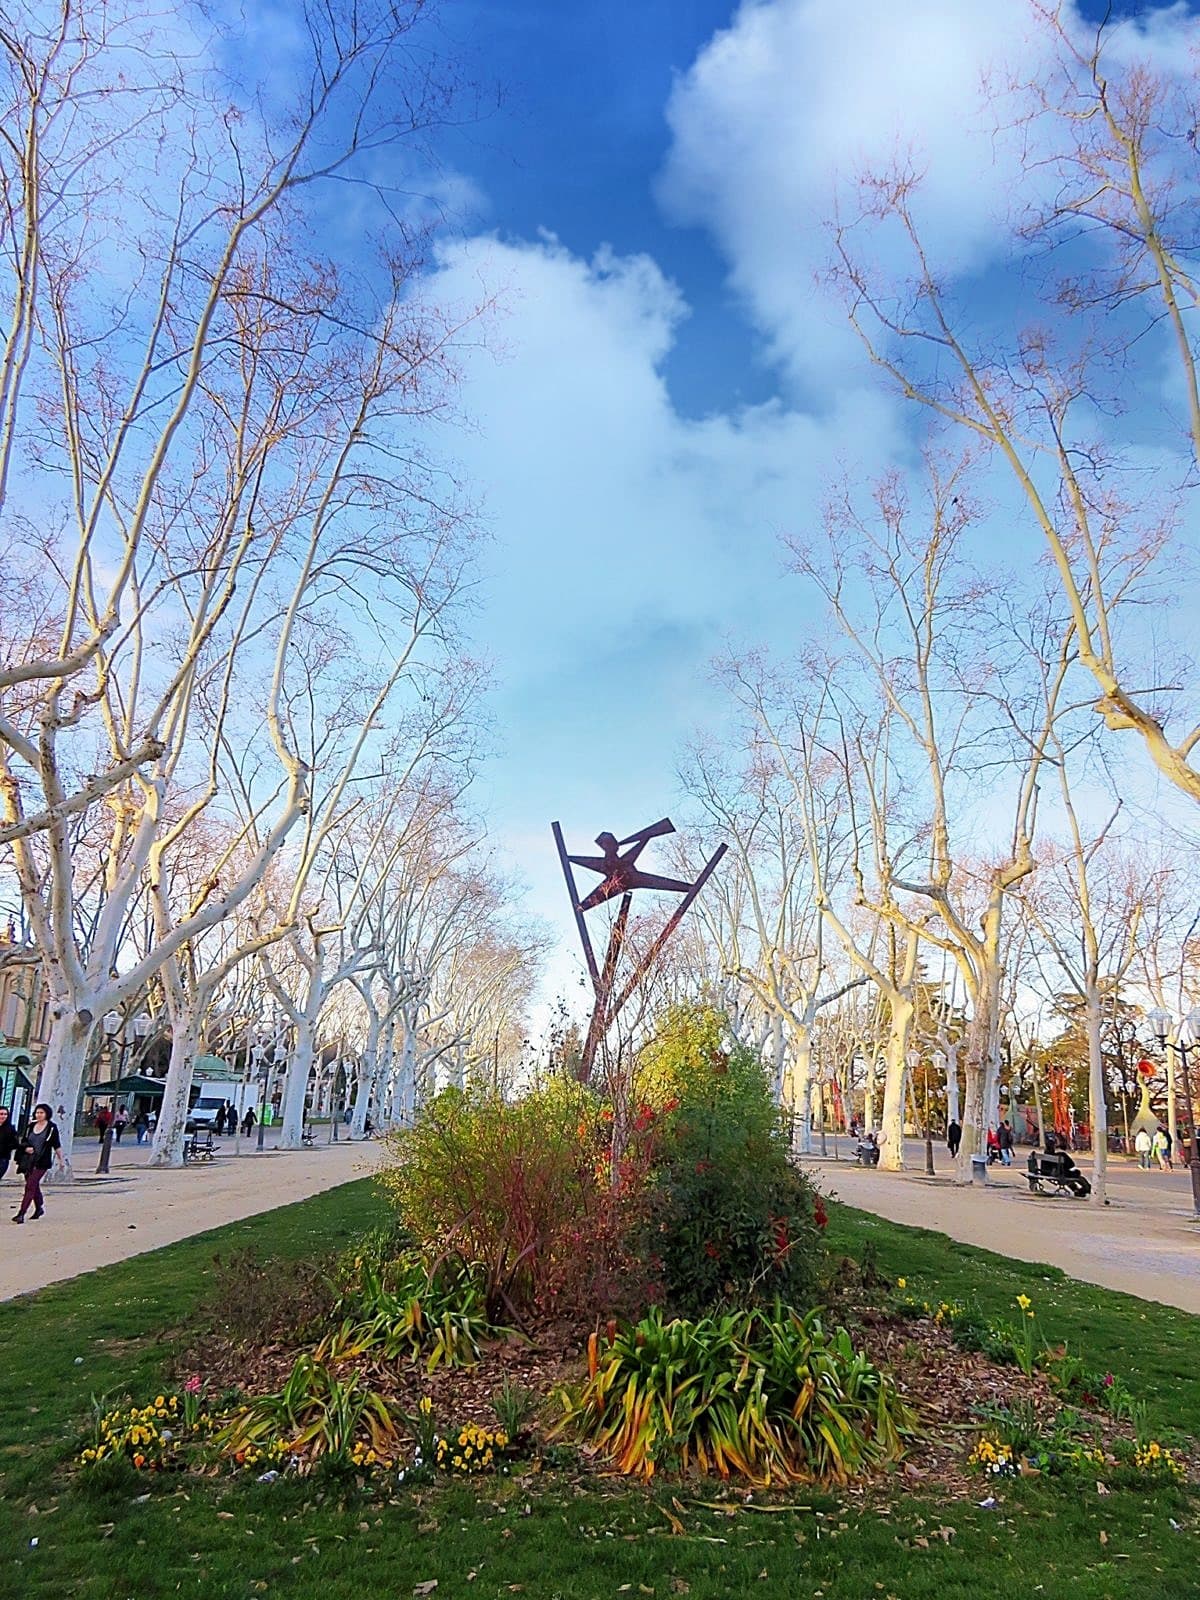 The beautiful Esplanade Charles de Gaulle is a beautiful place for a stroll in Montpellier with kids